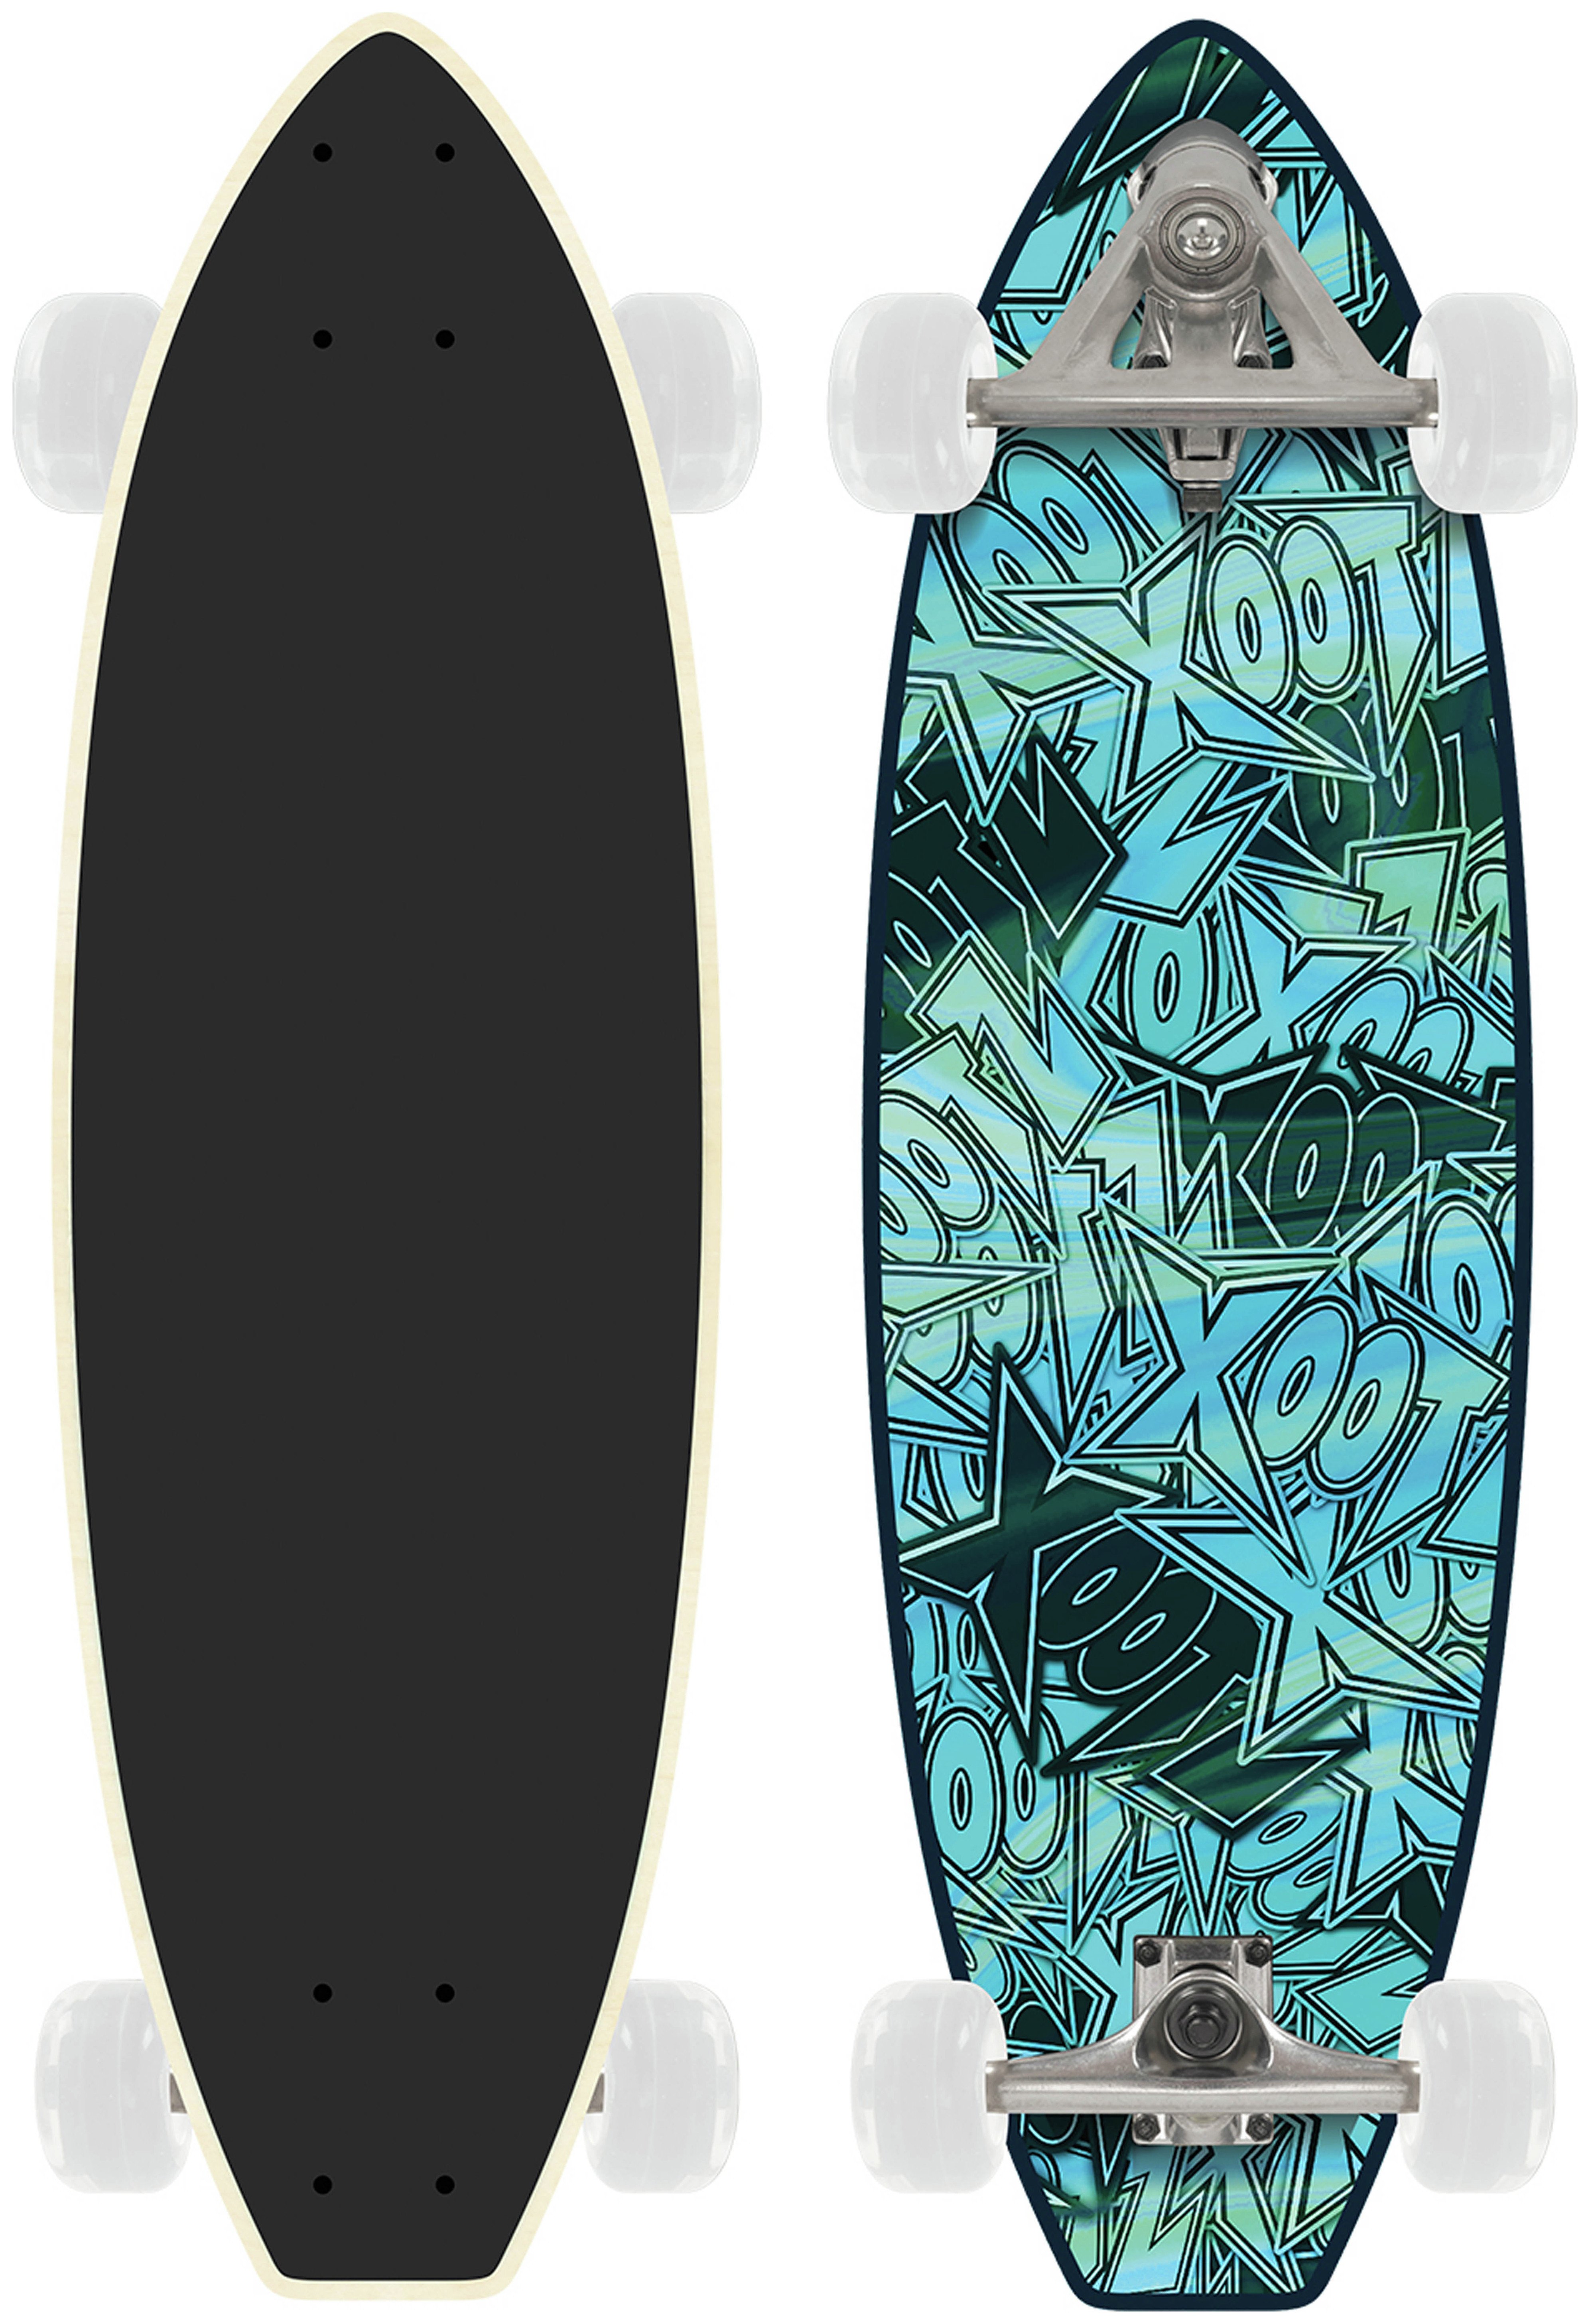 Xootz 27 Inch Carve Board - Marble